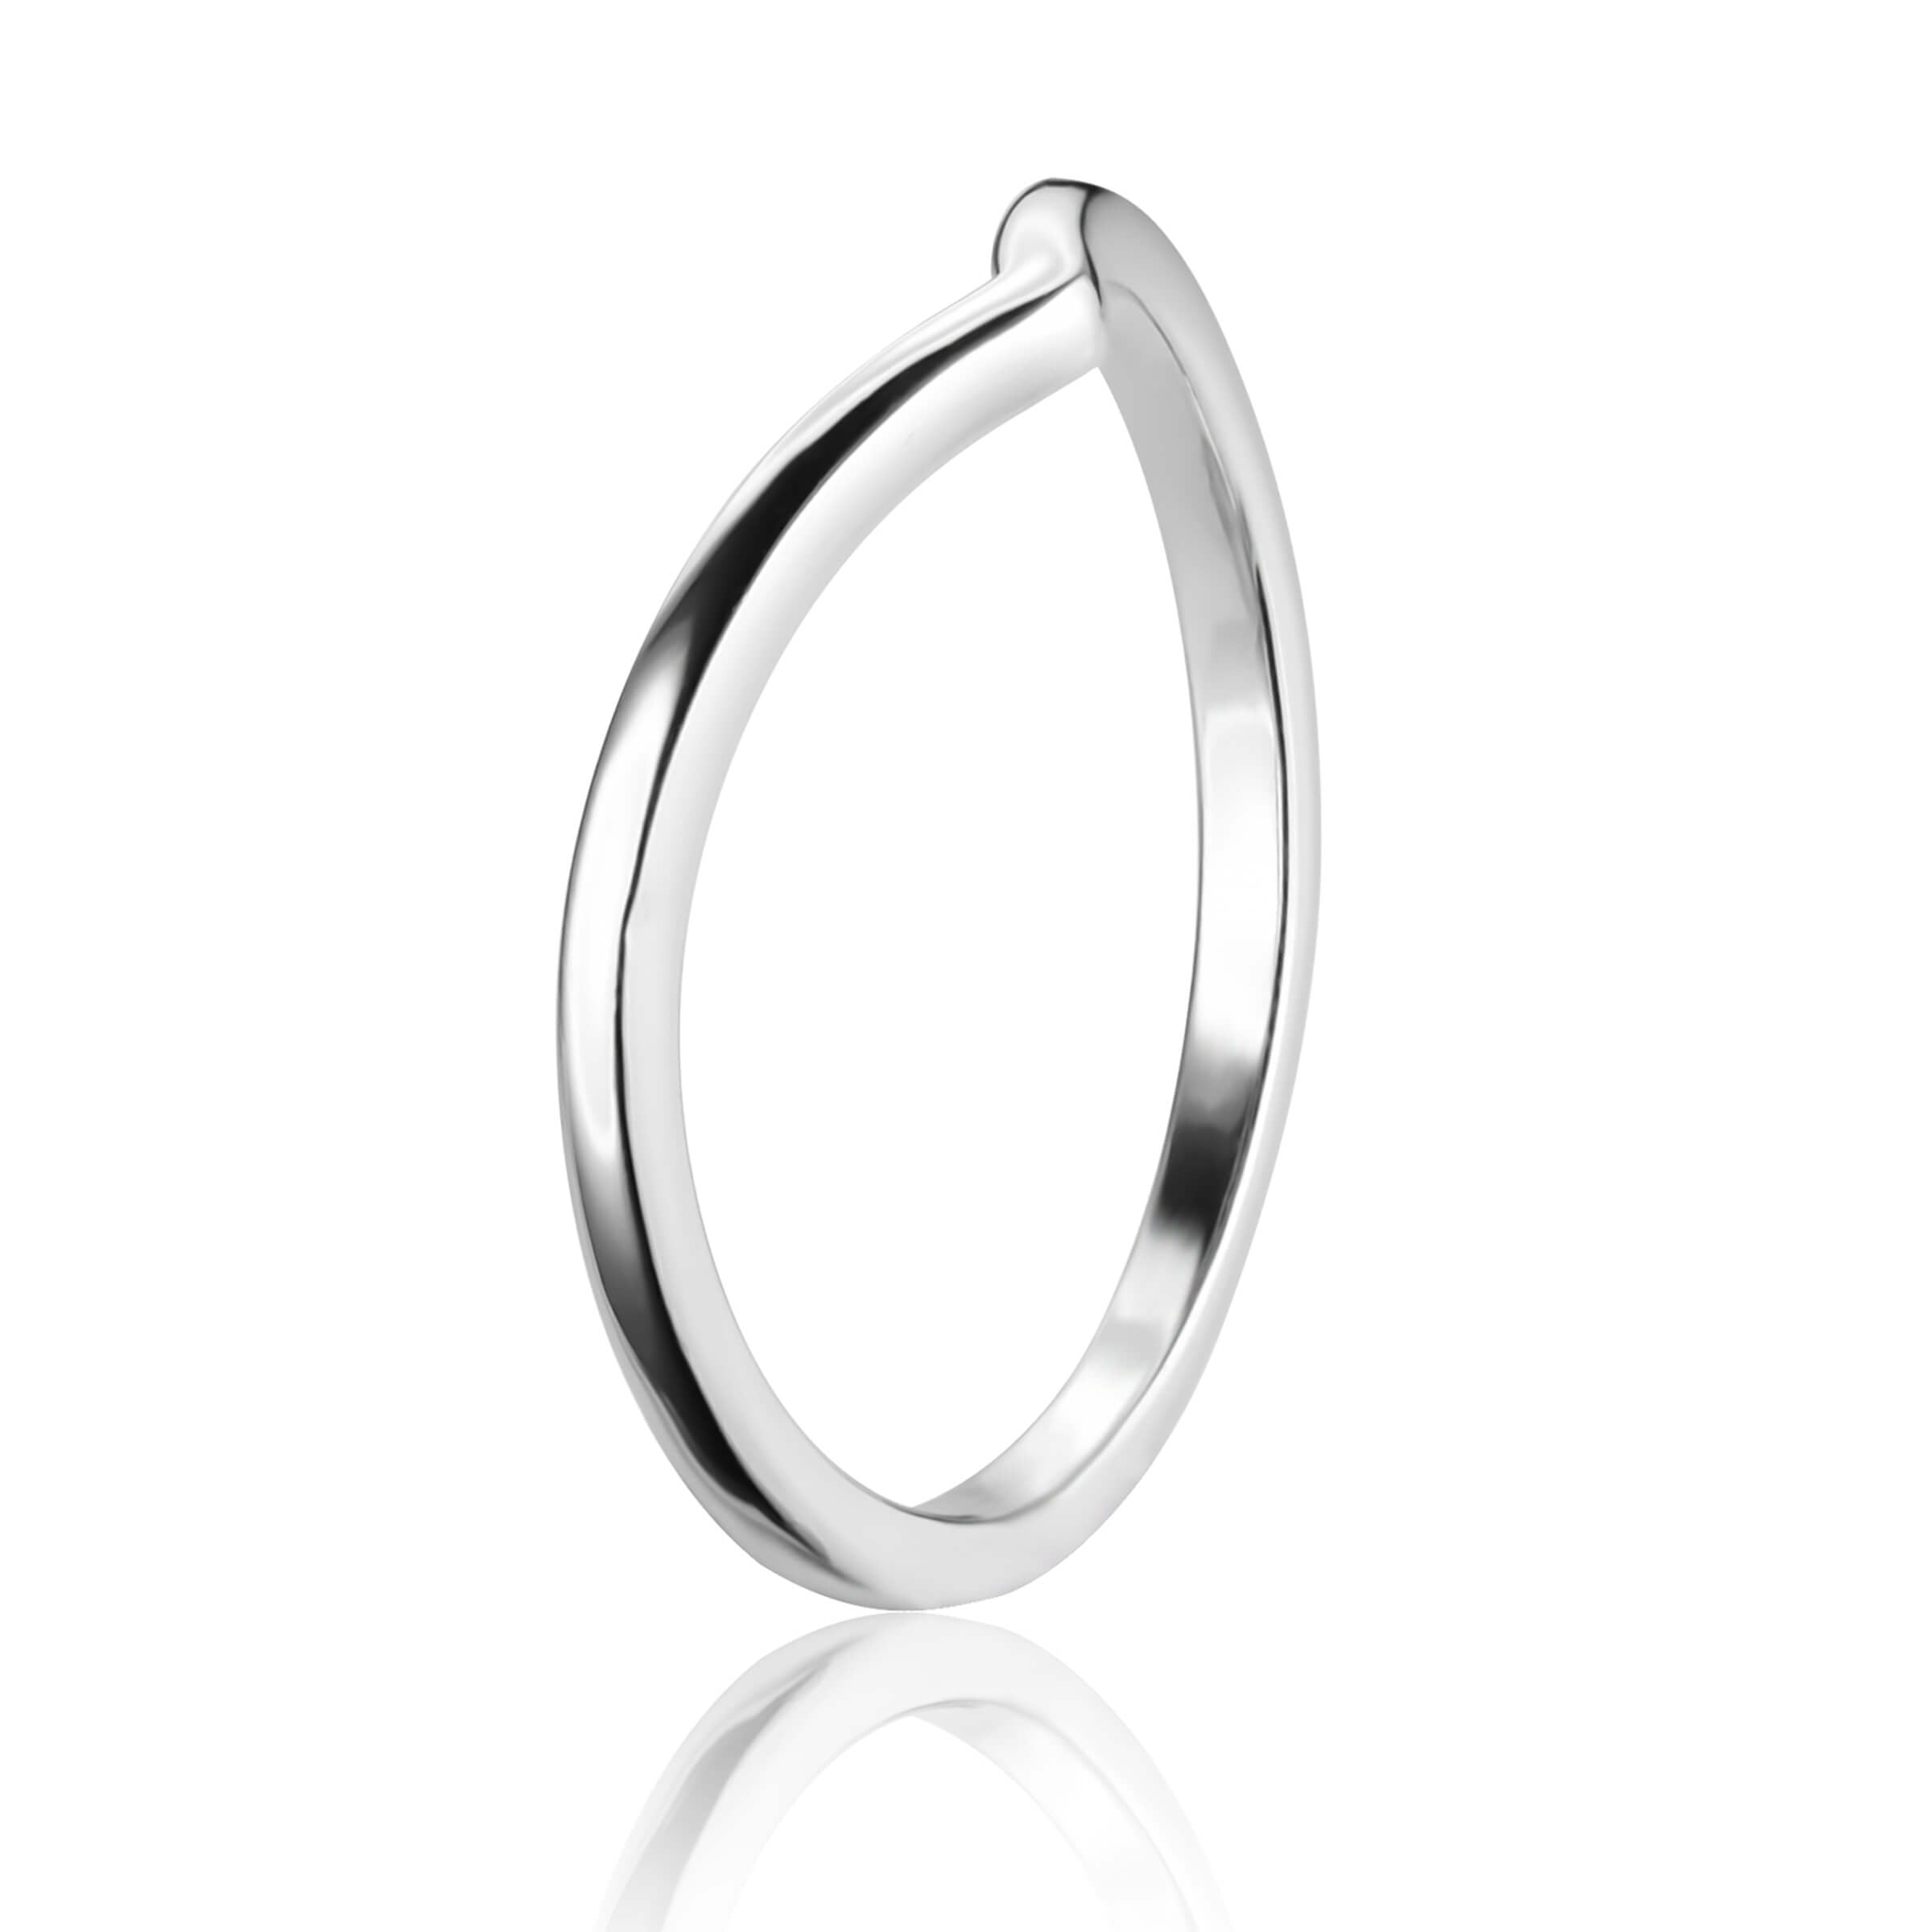 Hammered Sterling Silver Ring Band for Men or Women – Kitty Stoykovich  Designs